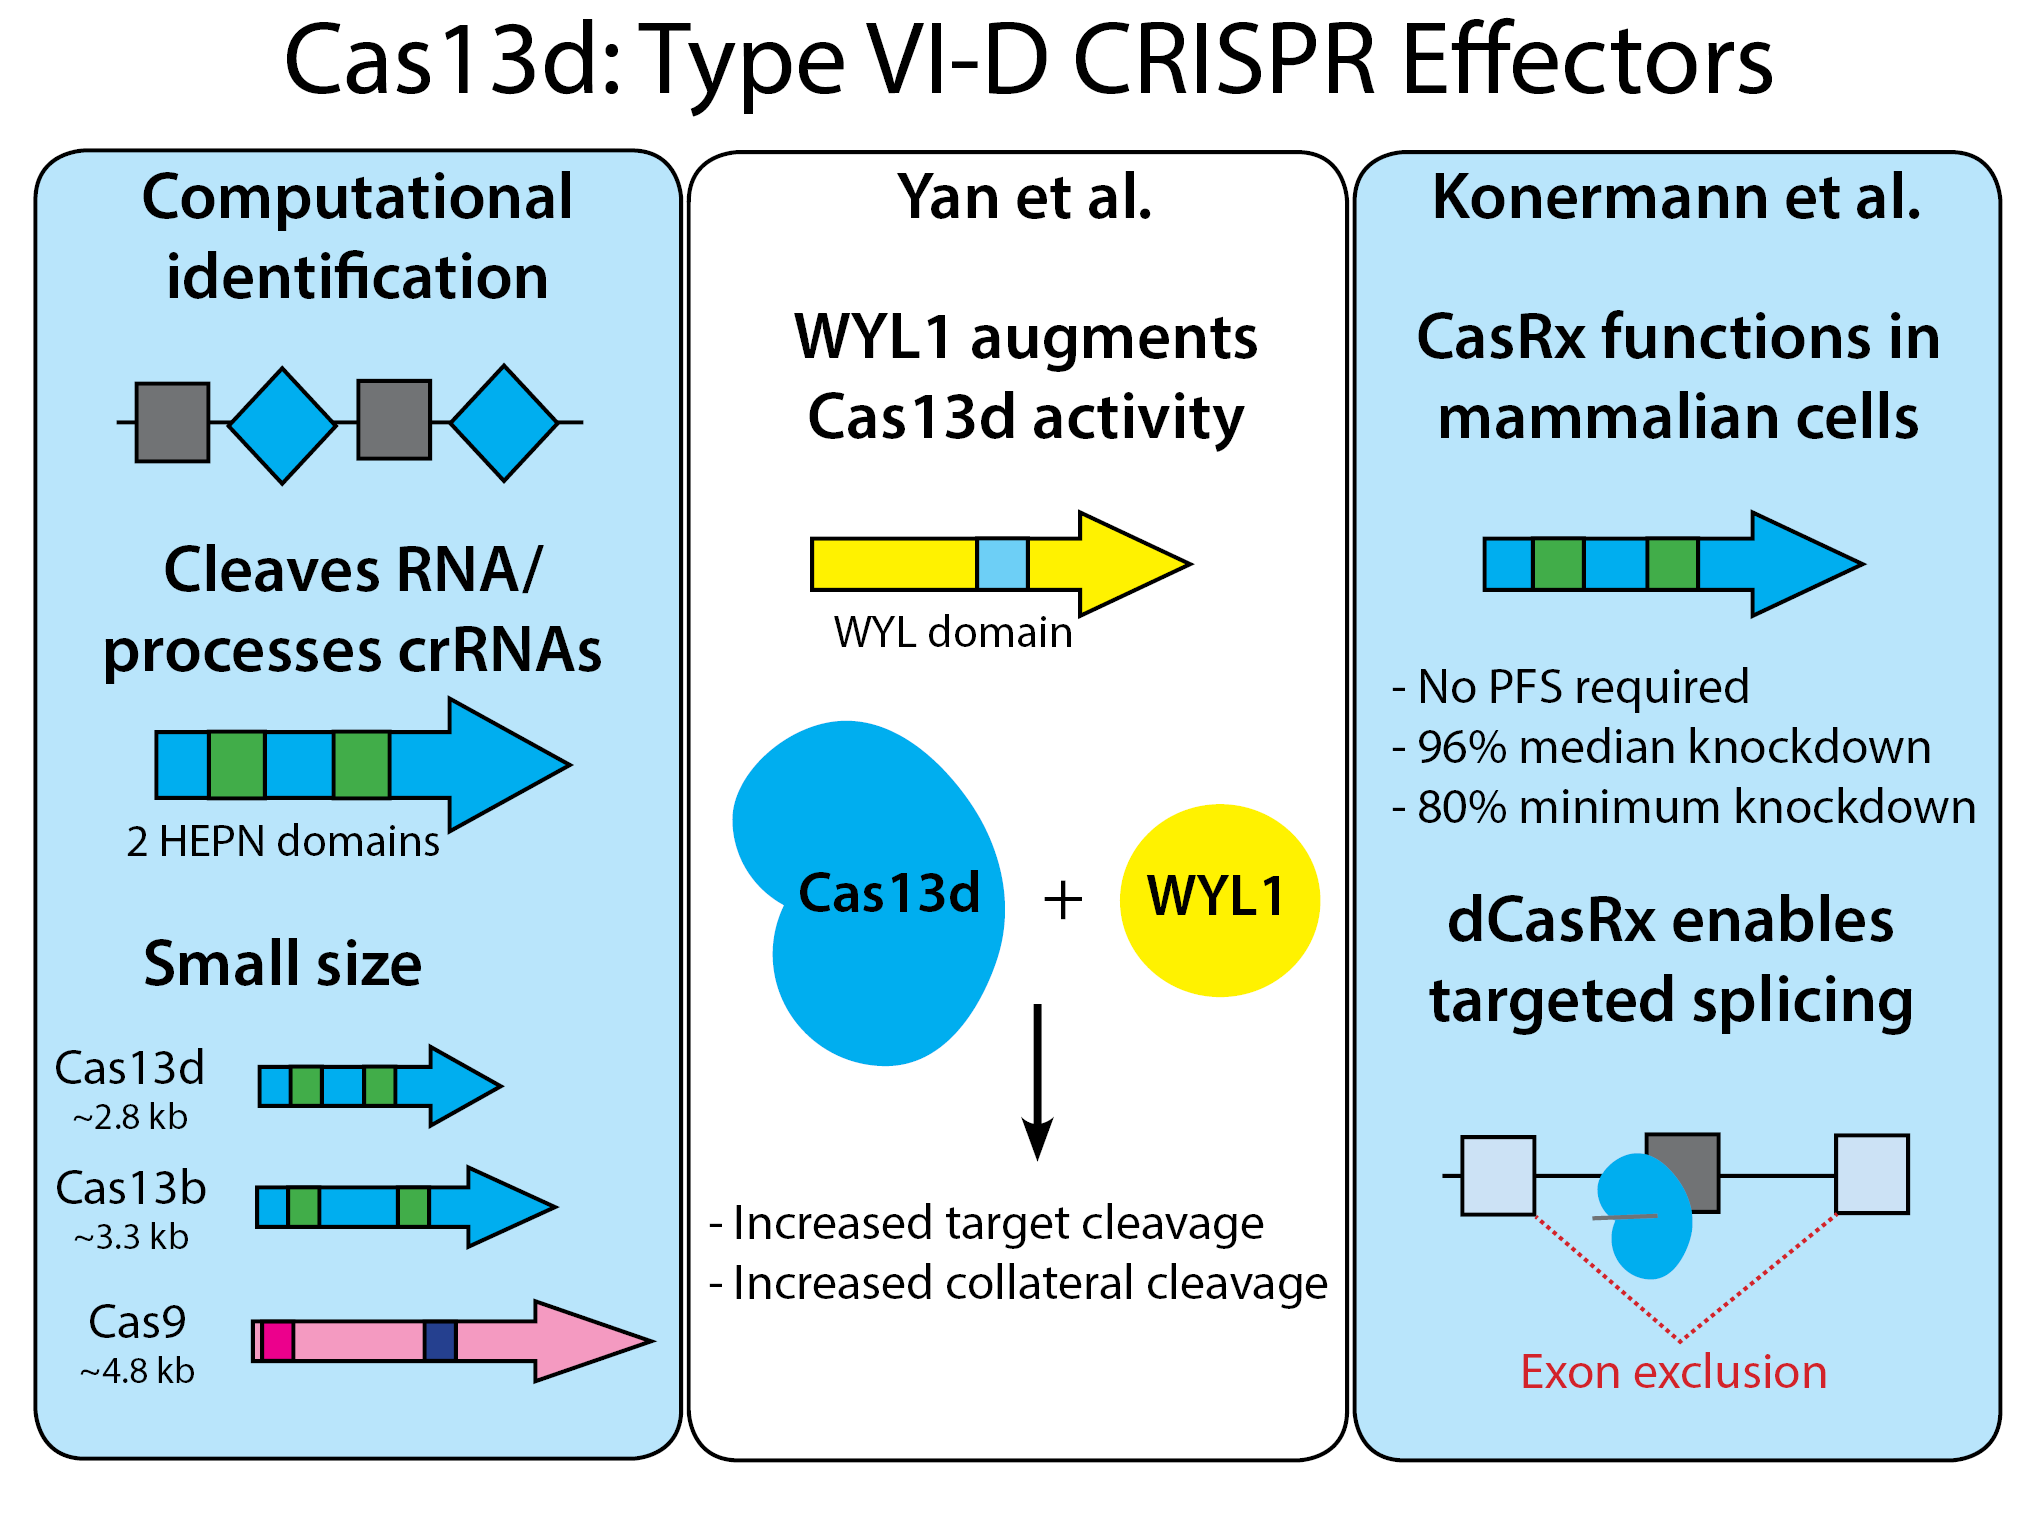 Schematic of Cas13d CRISPR effectors. The left of the graphic shows the small size of Cas13d at 2.8 kb, compared to Cas13b at 3.3 kb, and Cas9 at 4.8 kb. The Yan et al. paper describes Cas13d with the WYL1 domain to increase target cleavage and collateral cleavage. The Konermann et al. paper describes CasRx function in mammalian cells which does not require PFS, and results in 96% median knockdown and 80% minimum knockdown. dCasRx enables targeted splicing to exclude exons.